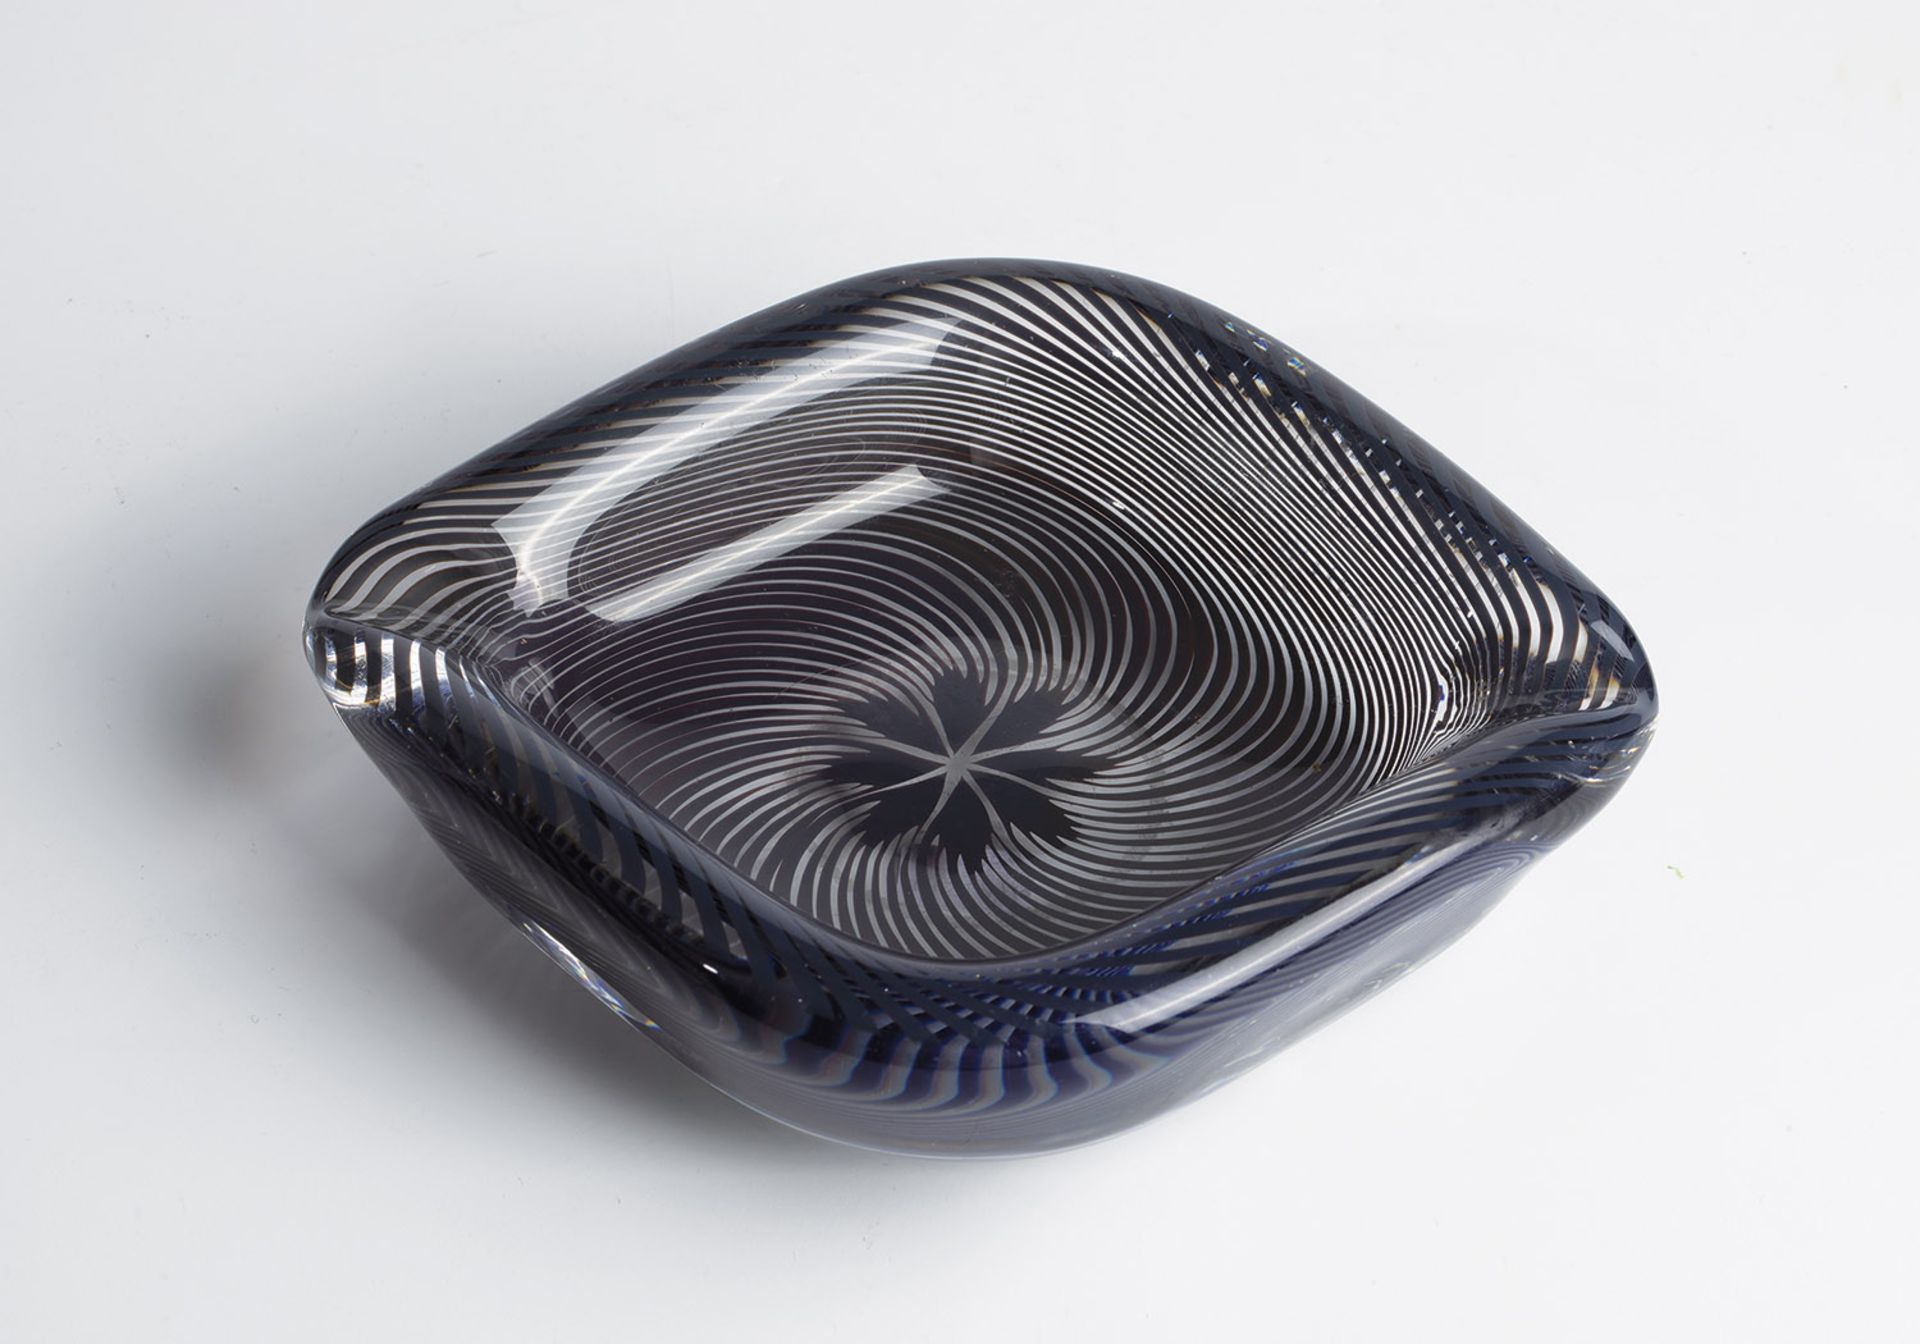 Ashtray ''Graal'' Edward Hald (design), Orrefors, 1949 Colourless glass with egg-melted grey-blue